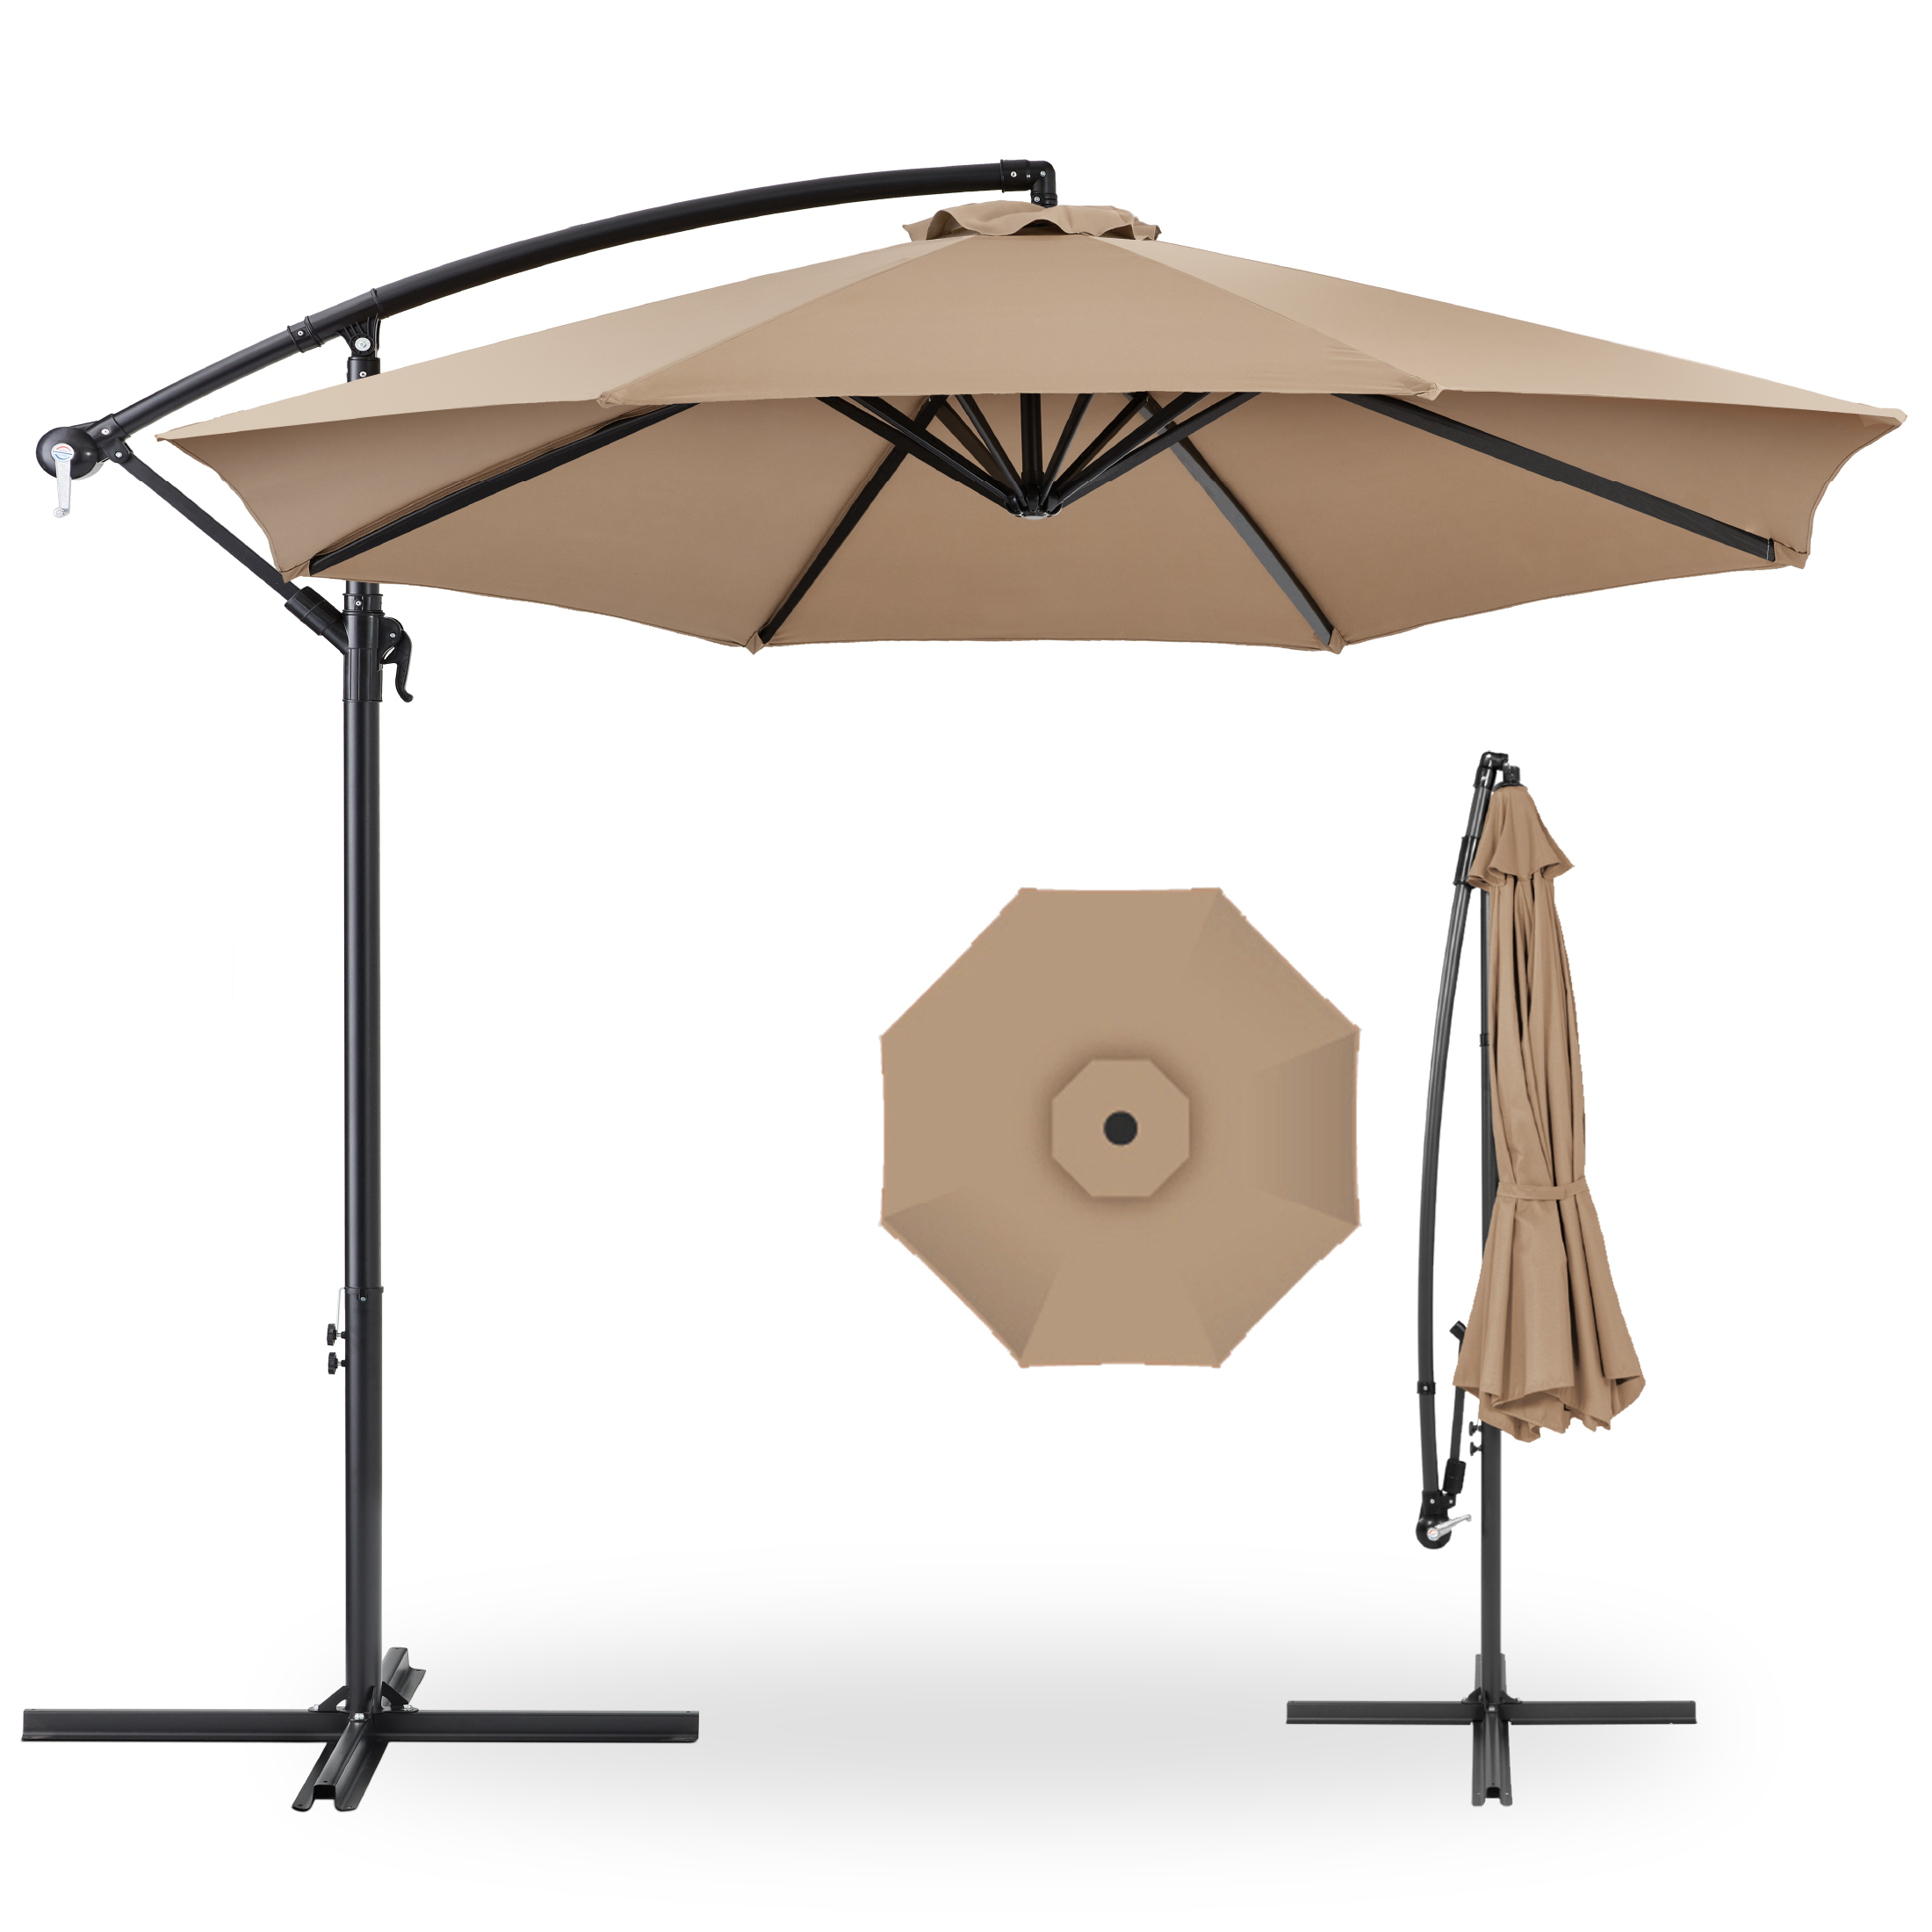 Best Choice Products 10ft Offset Hanging Outdoor Market Patio Umbrella w/ Easy Tilt Adjustment - Tan - image 1 of 7